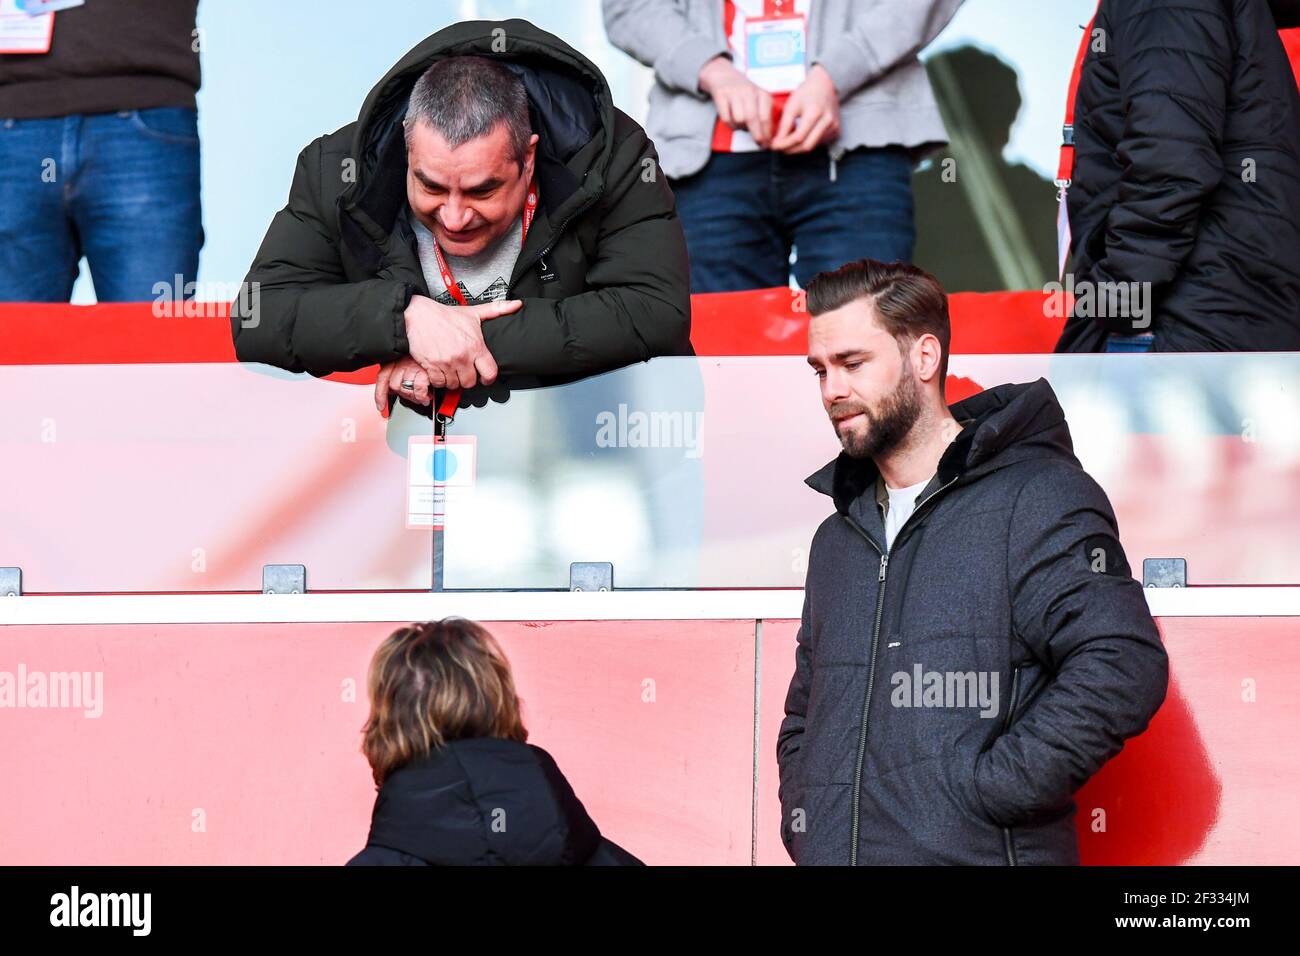 EINDHOVEN, NETHERLANDS - MARCH 14: Frank Lammers during the Dutch Eredivisie match between PSV Eindhoven and Feyenoord Rotterdam at Philips Stadion on Stock Photo